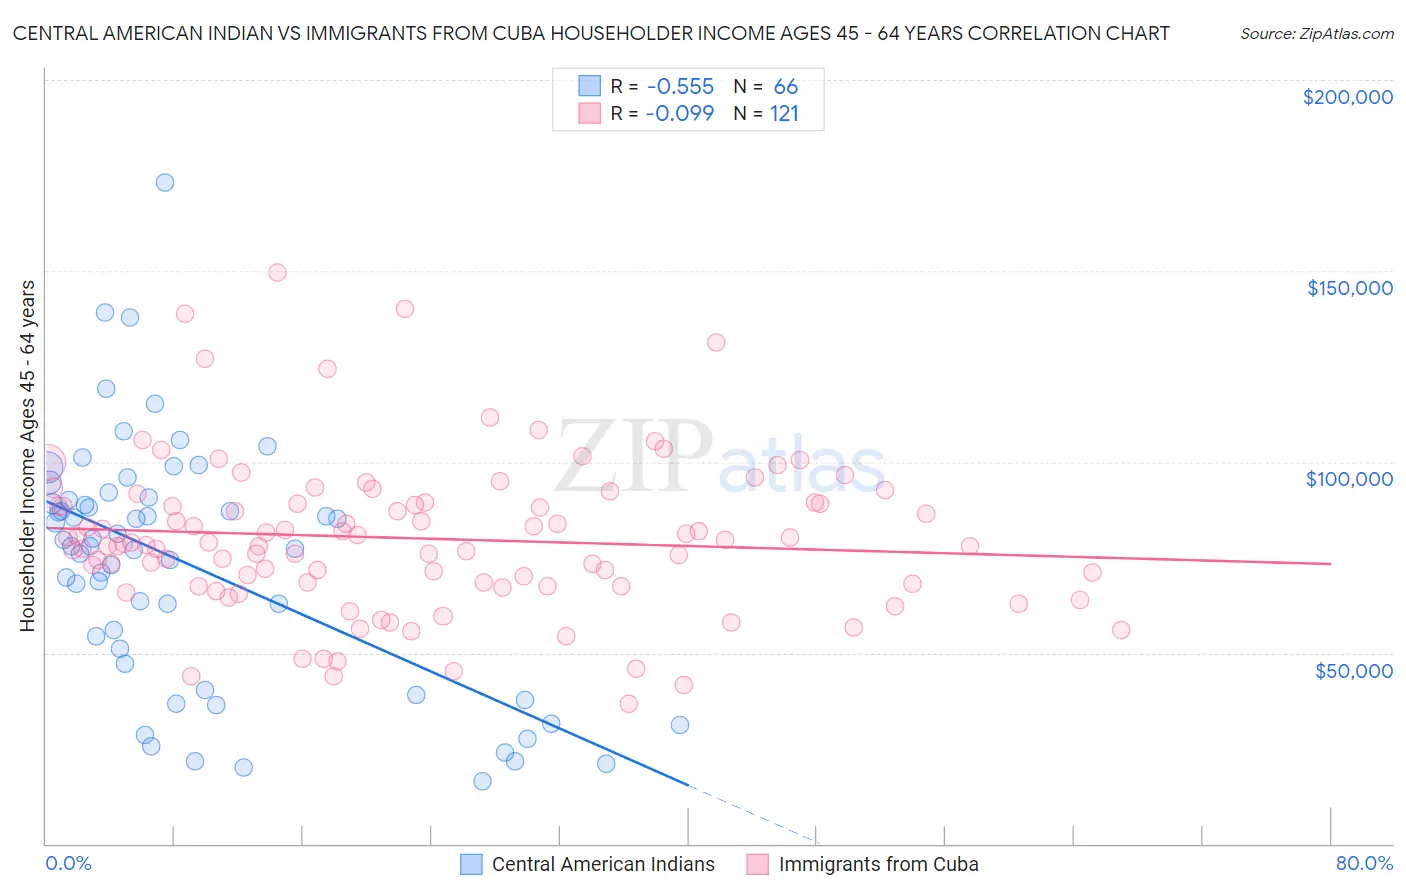 Central American Indian vs Immigrants from Cuba Householder Income Ages 45 - 64 years